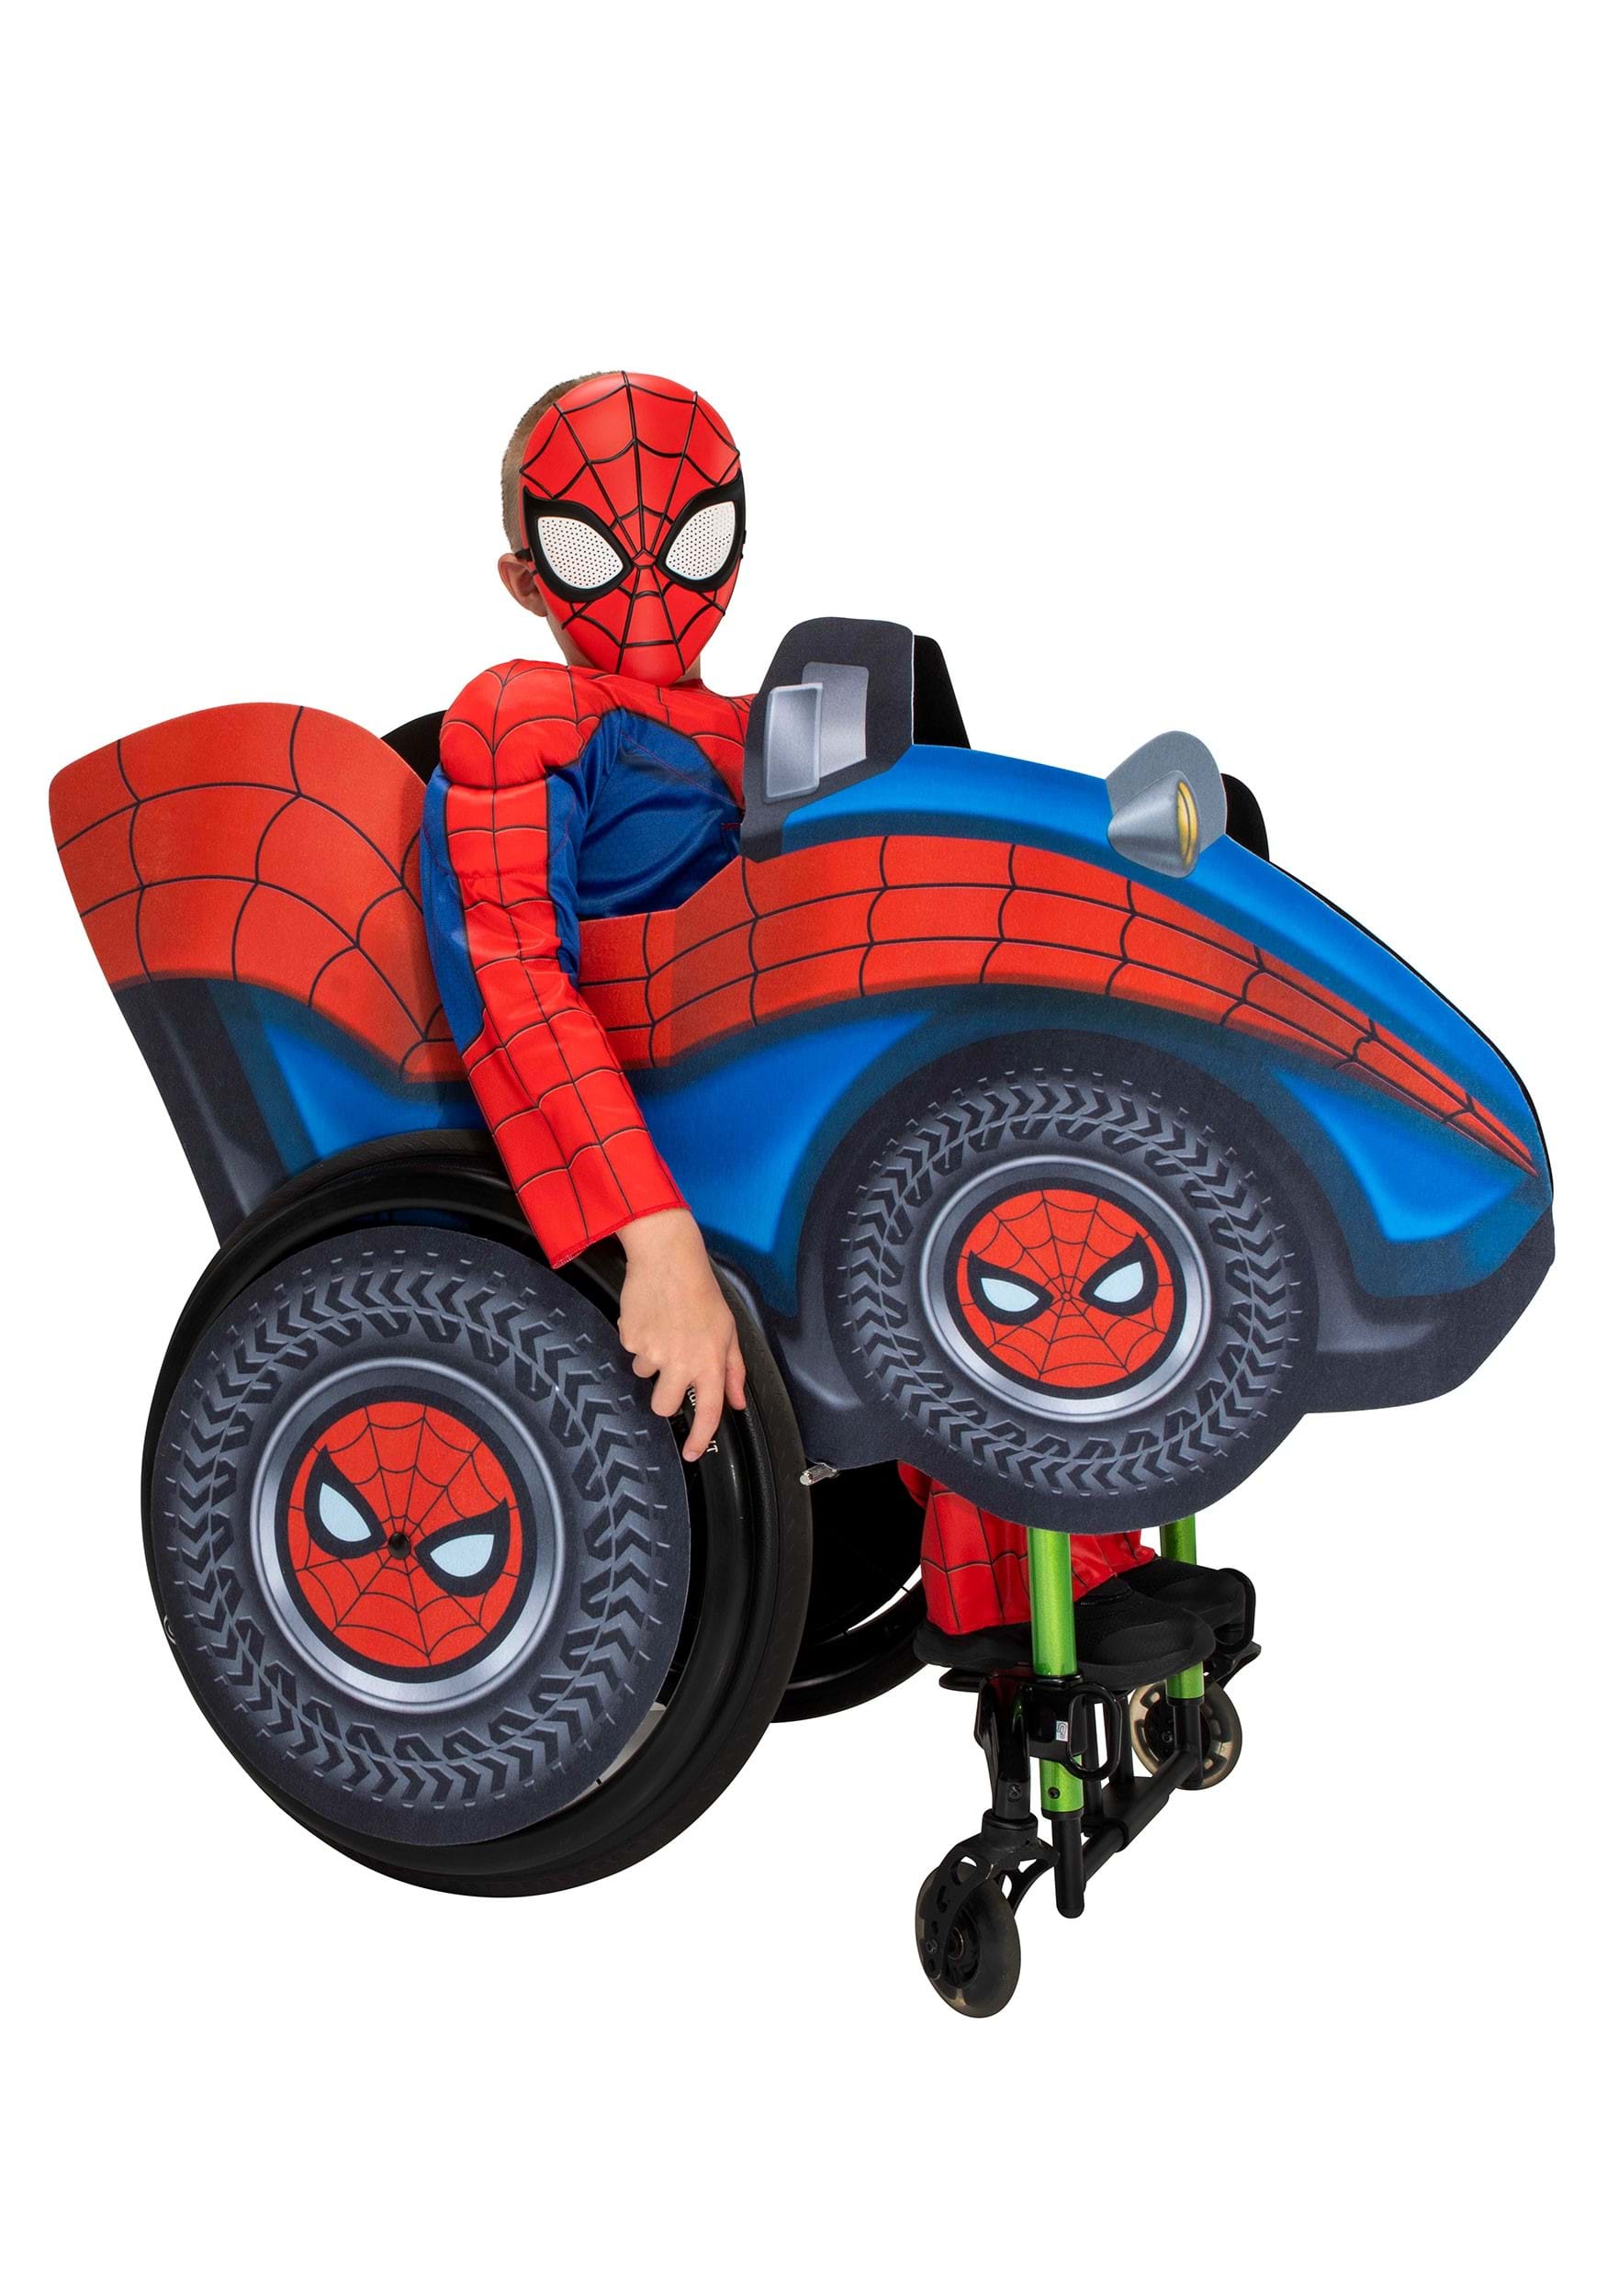 Marvel Spiderman Sunglasses : : Clothing, Shoes & Accessories